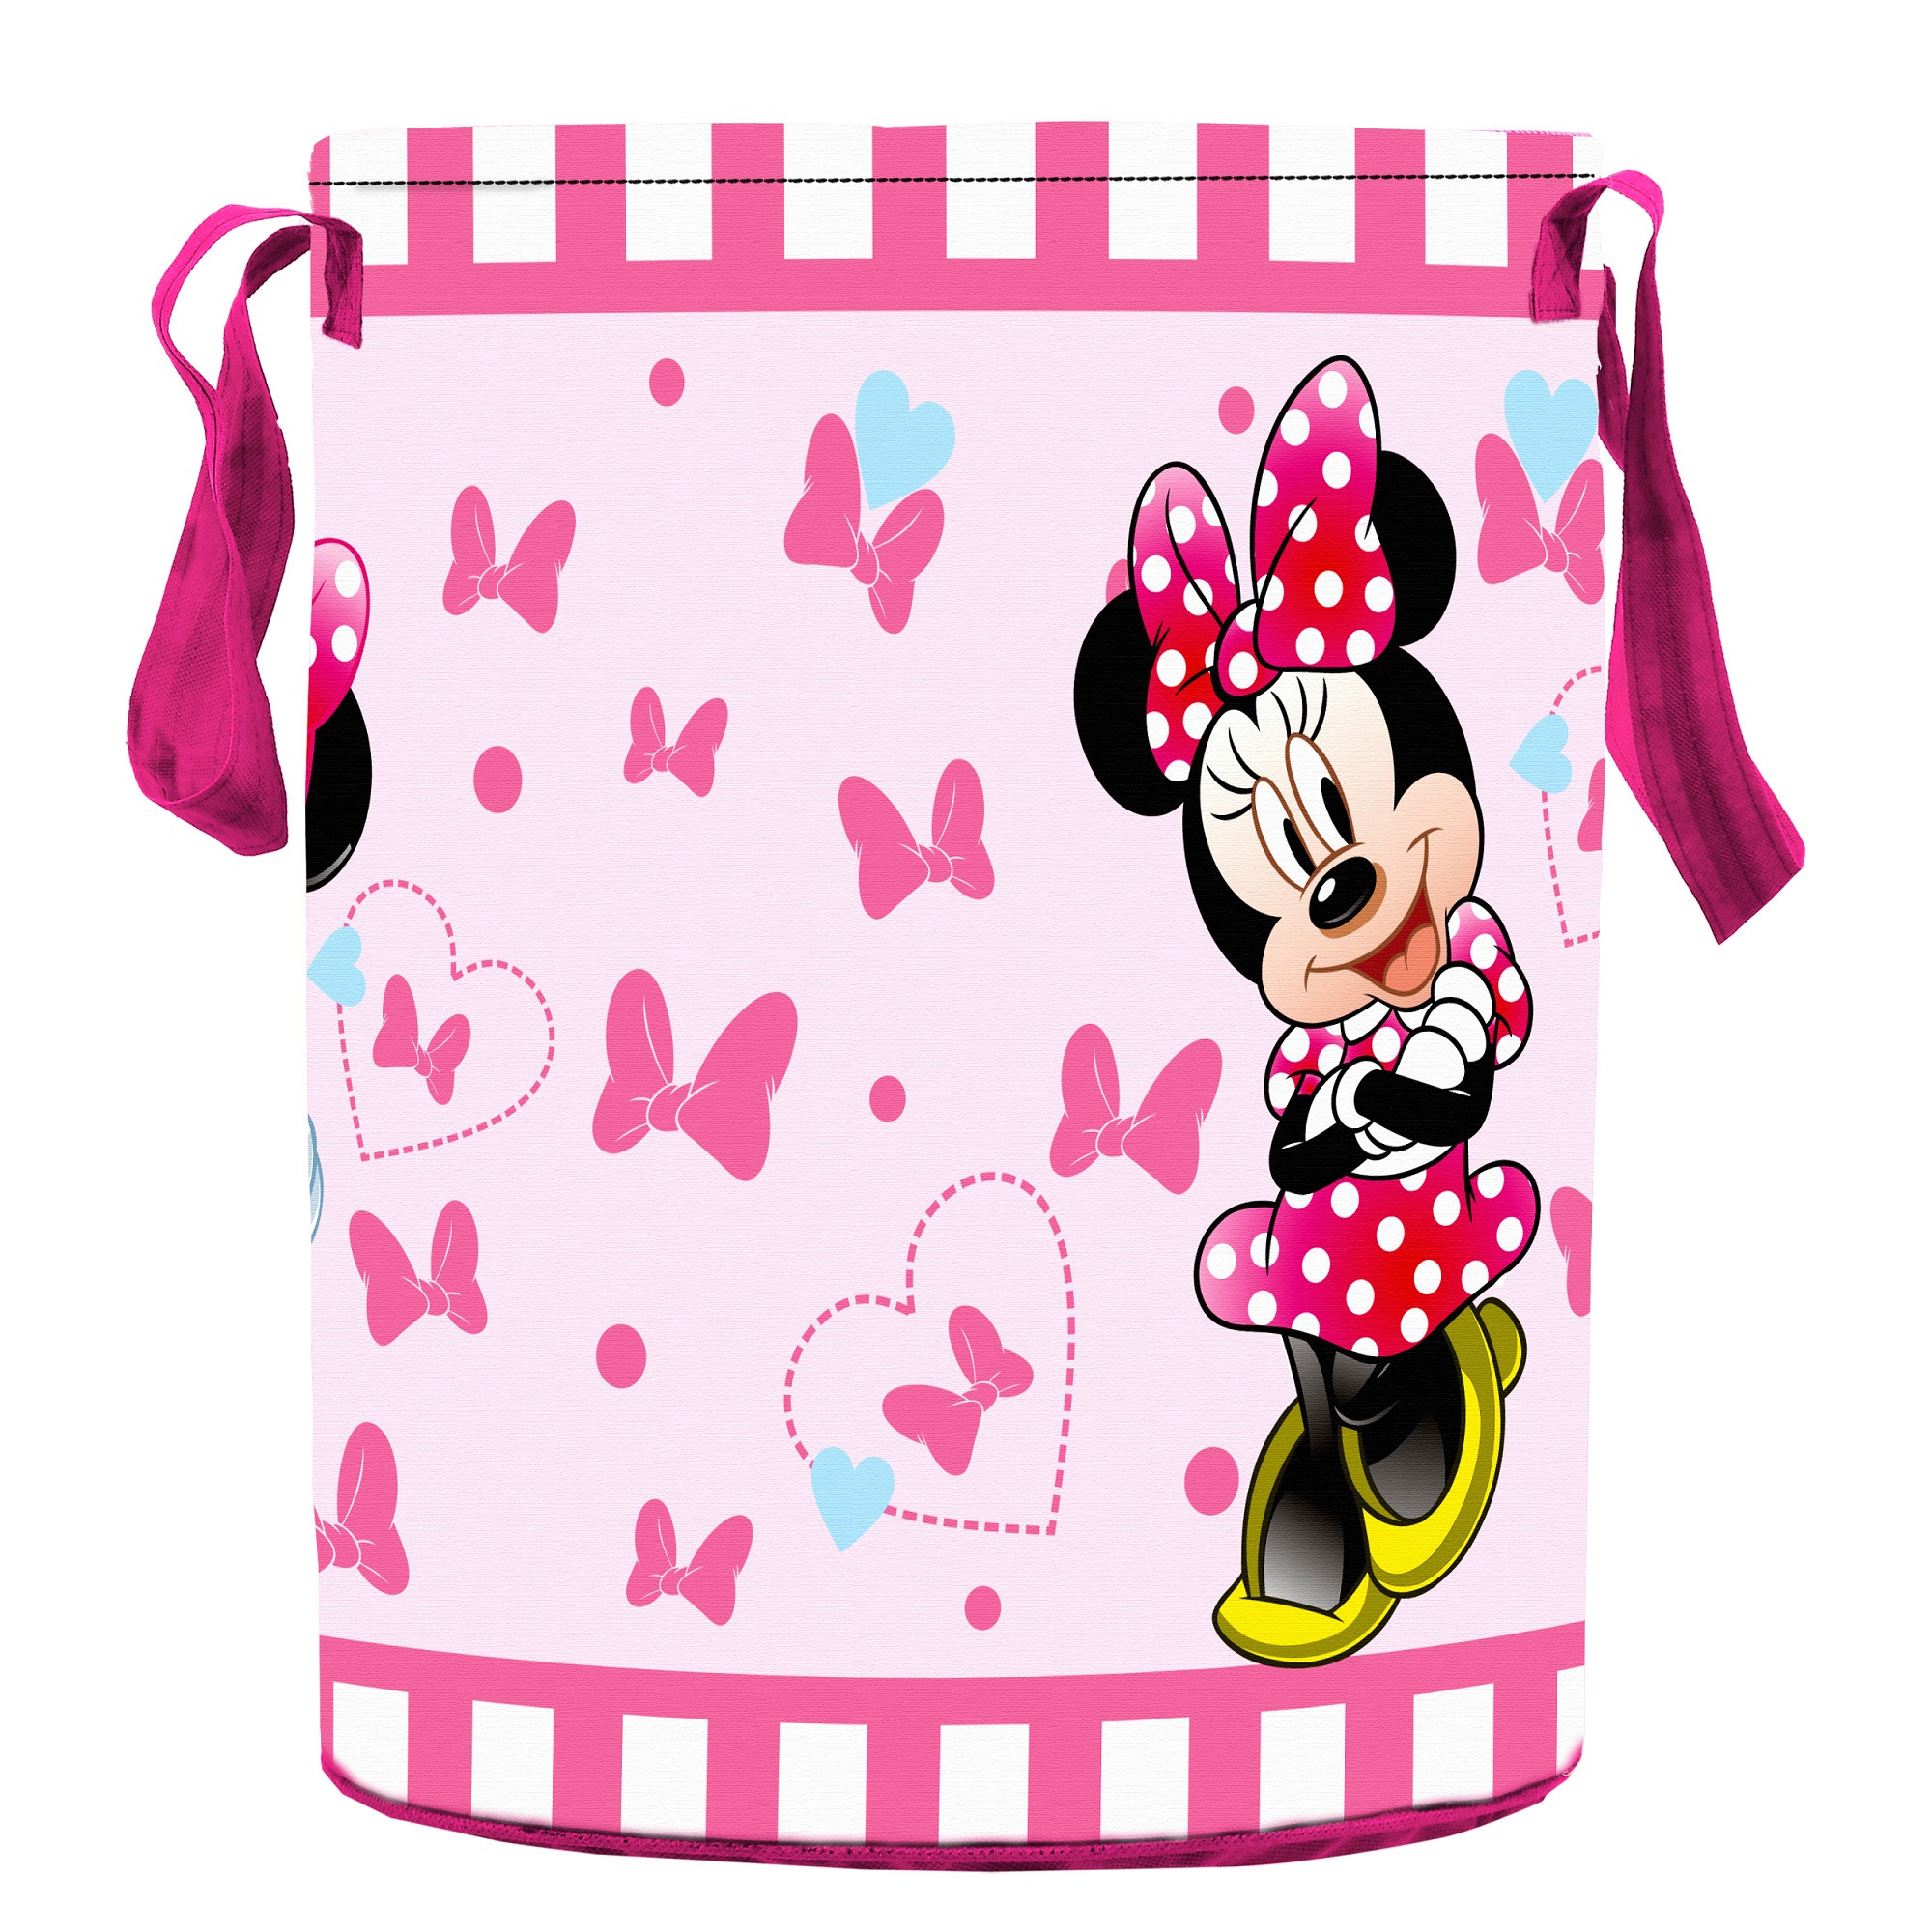 Kuber Industries Disney Mickey Minnie Print Non Woven Fabric Foldable Laundry Basket , Toy Storage Basket, Cloth Storage Basket With Handles,45 Ltr (Set Of 2, Maroon & Pink)